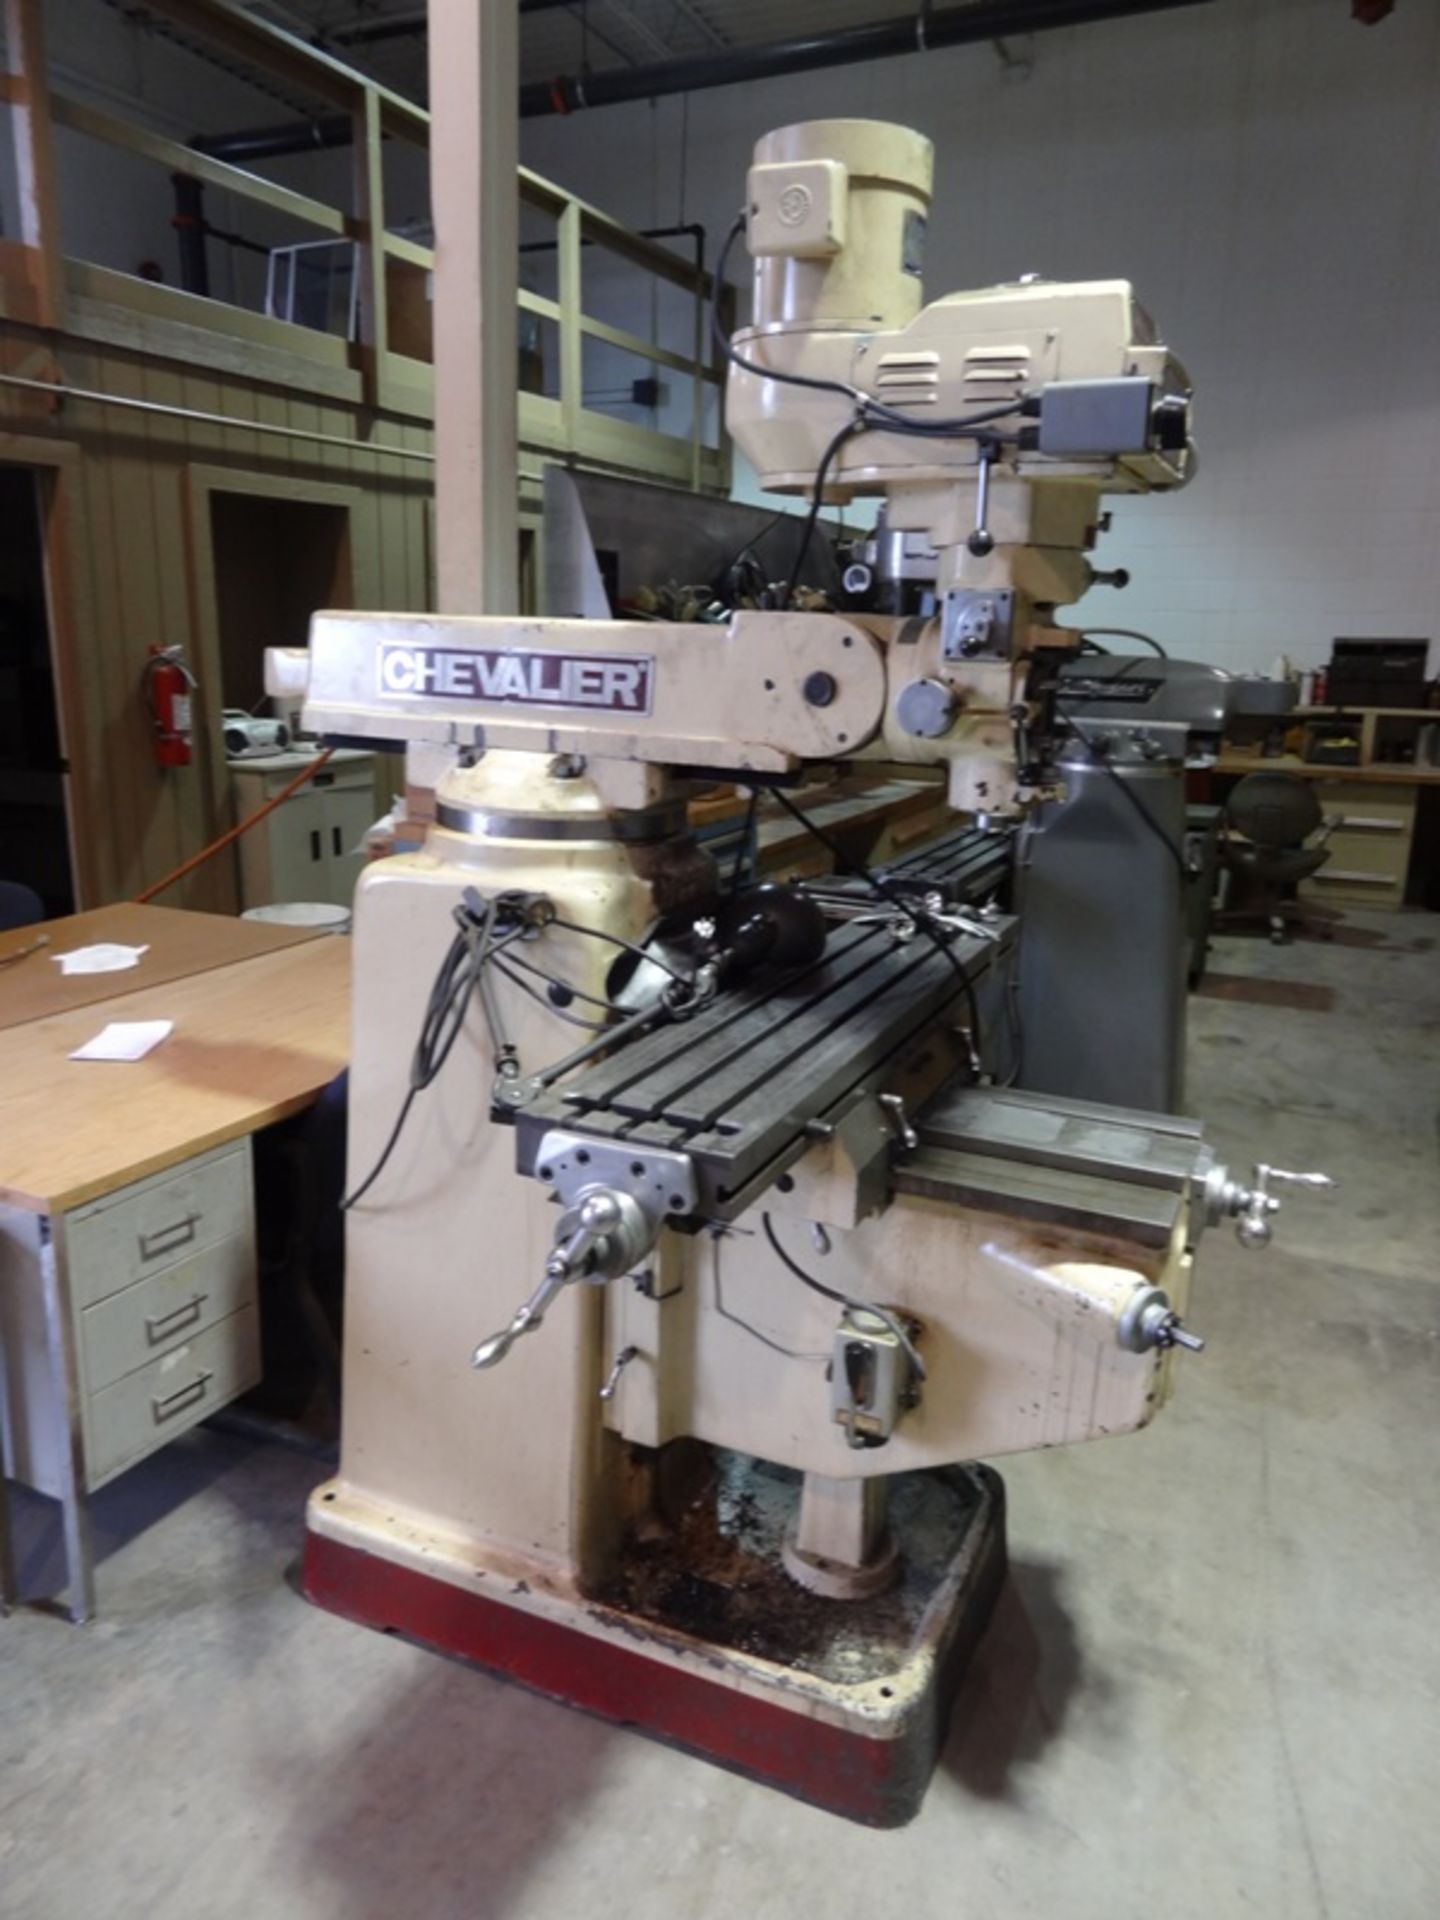 CHEVALIER KNEE MILL WITH DRO, SN 842167, LOCATION MI, BUYER TO SHIP LOADING FEE 150 - Image 4 of 8